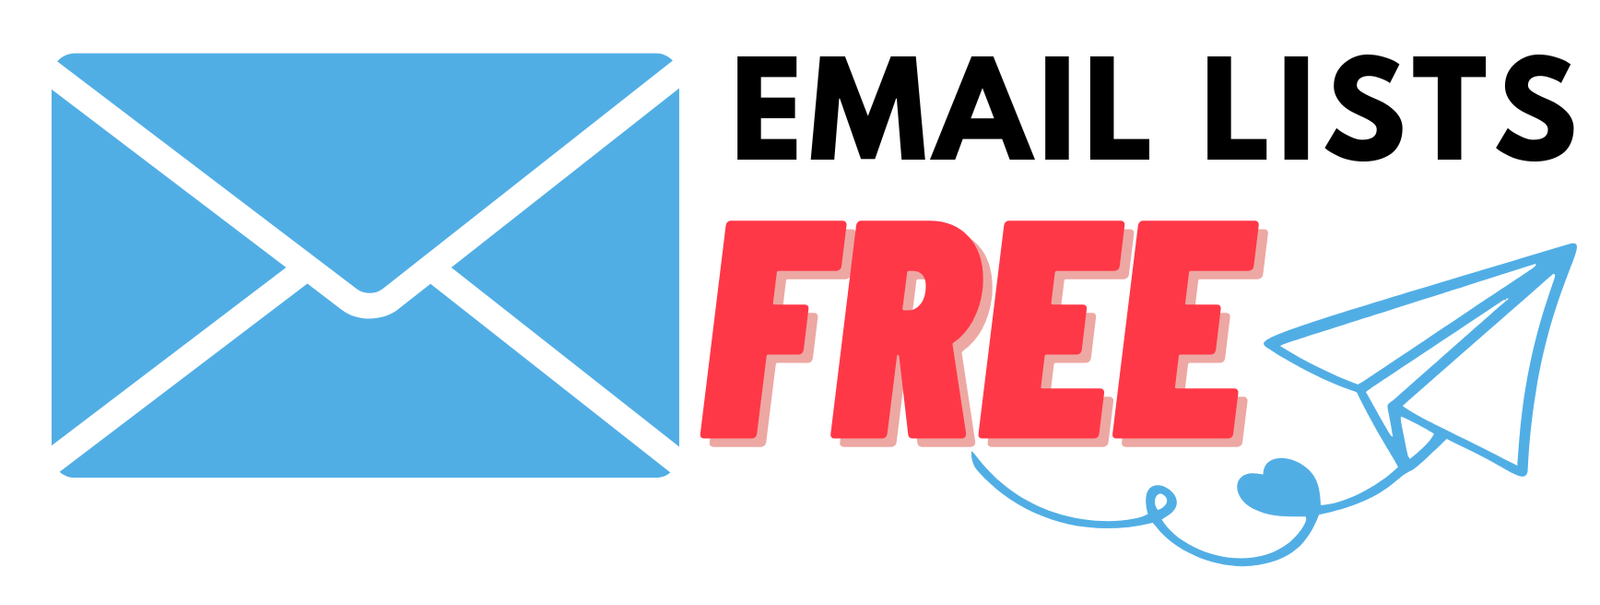 Email Lists Free